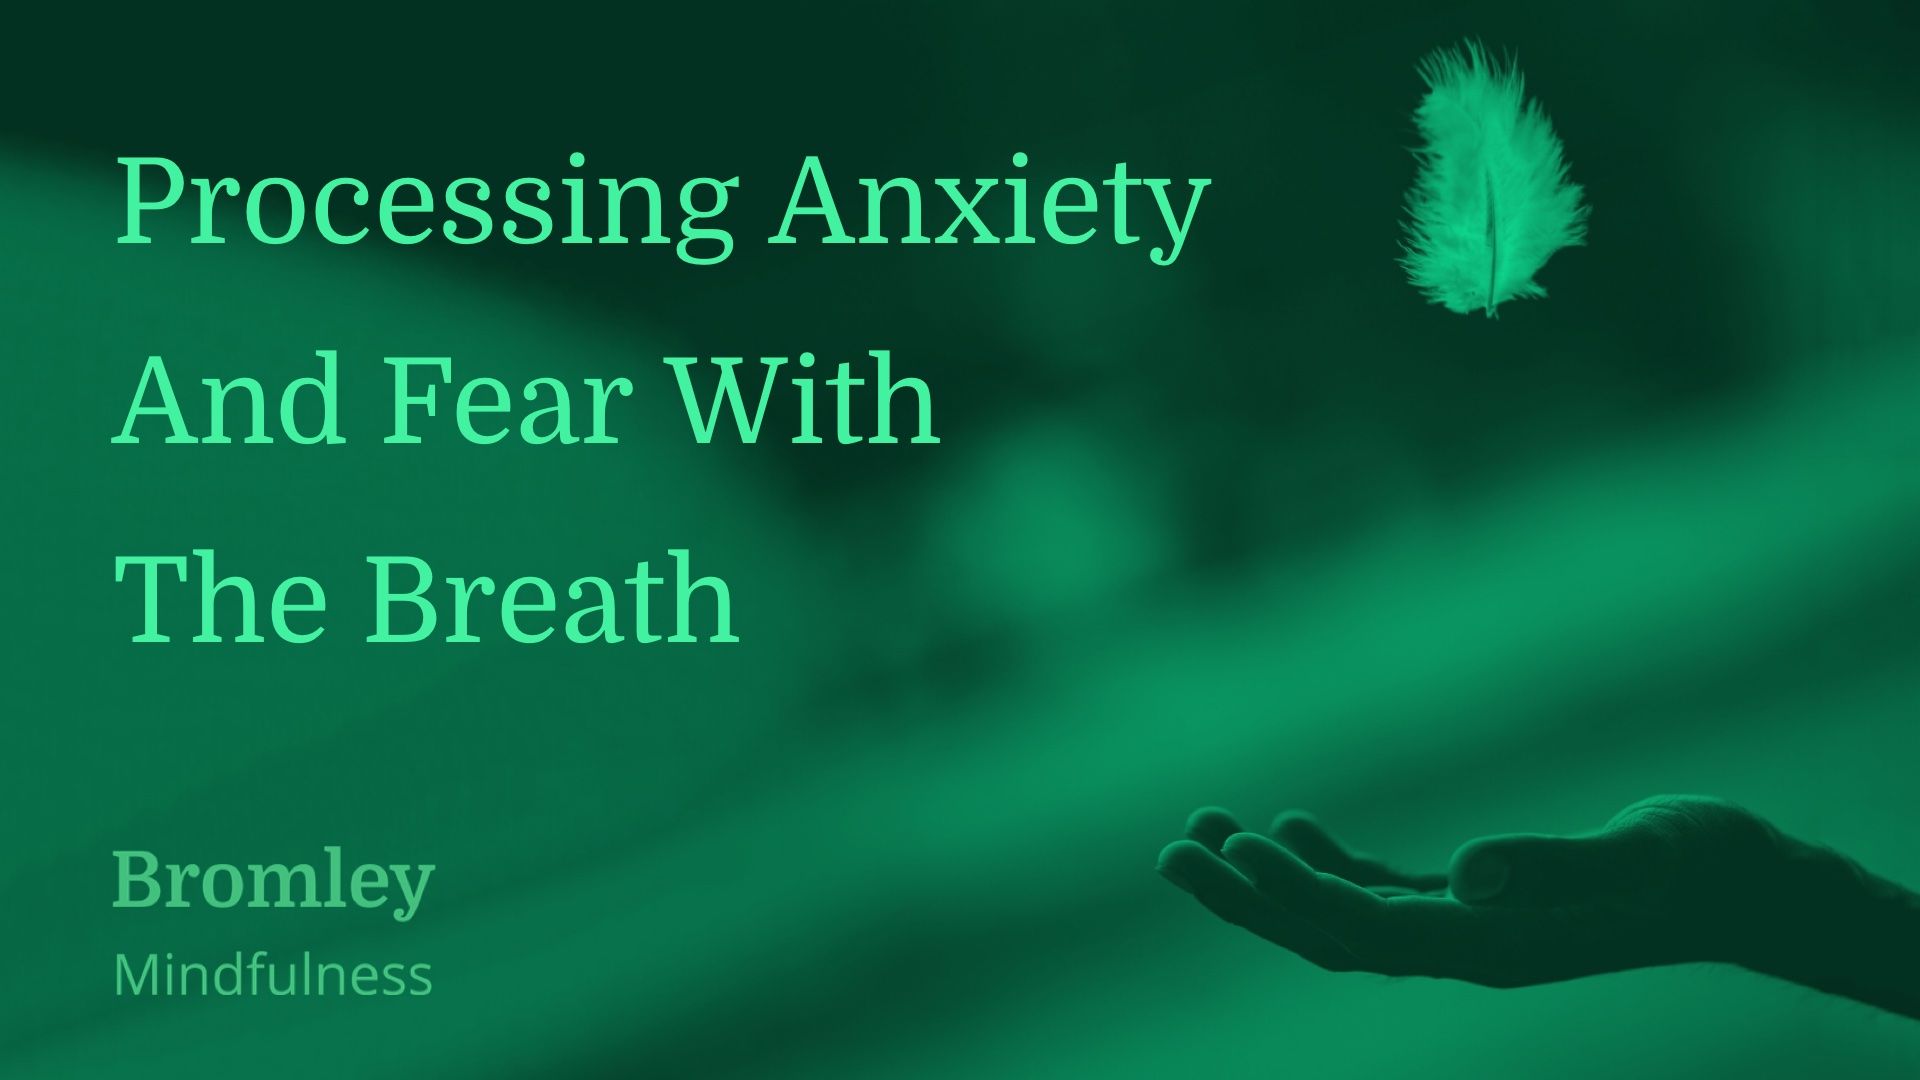 Processing Anxiety and Fear with The Breath